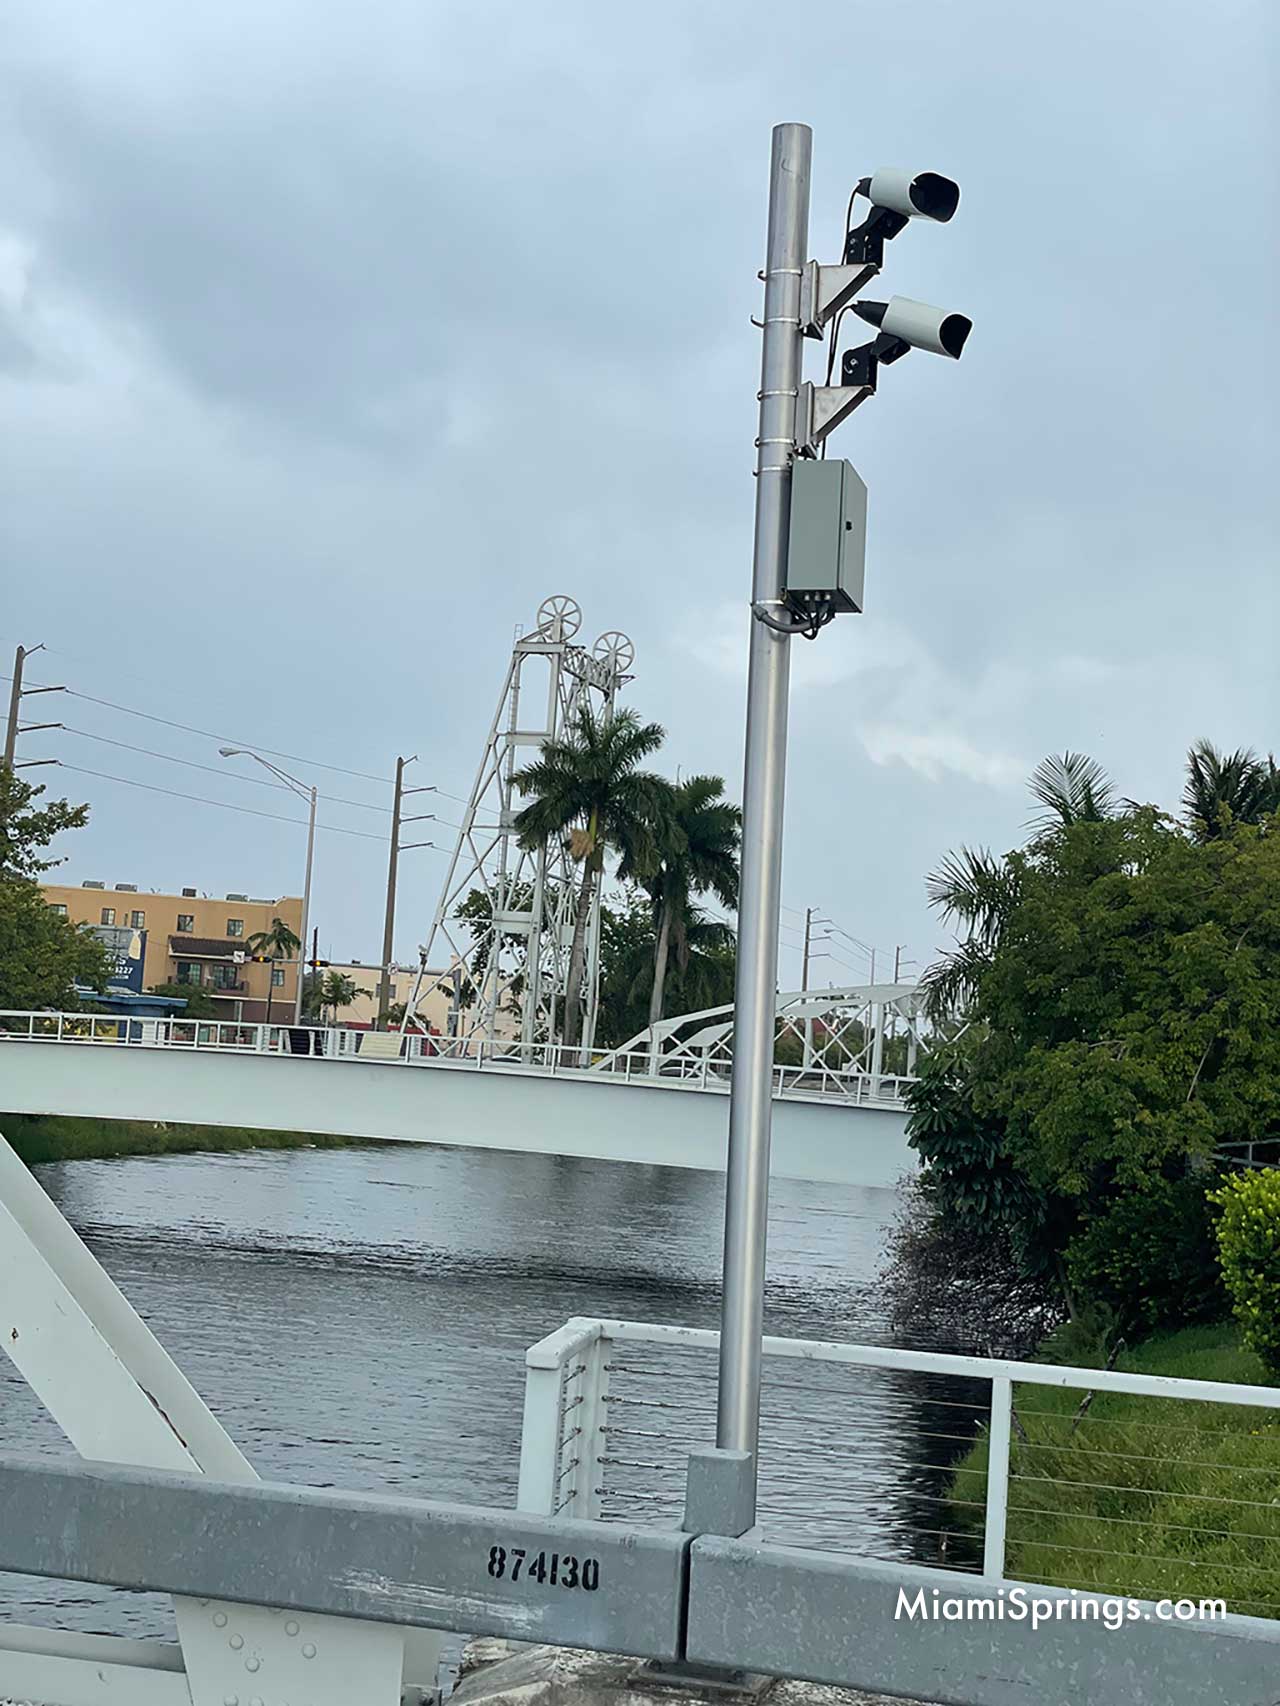 Automated License Plate Reader (ALPR) located at Curtiss Parkway and Canal Street in Miami Springs